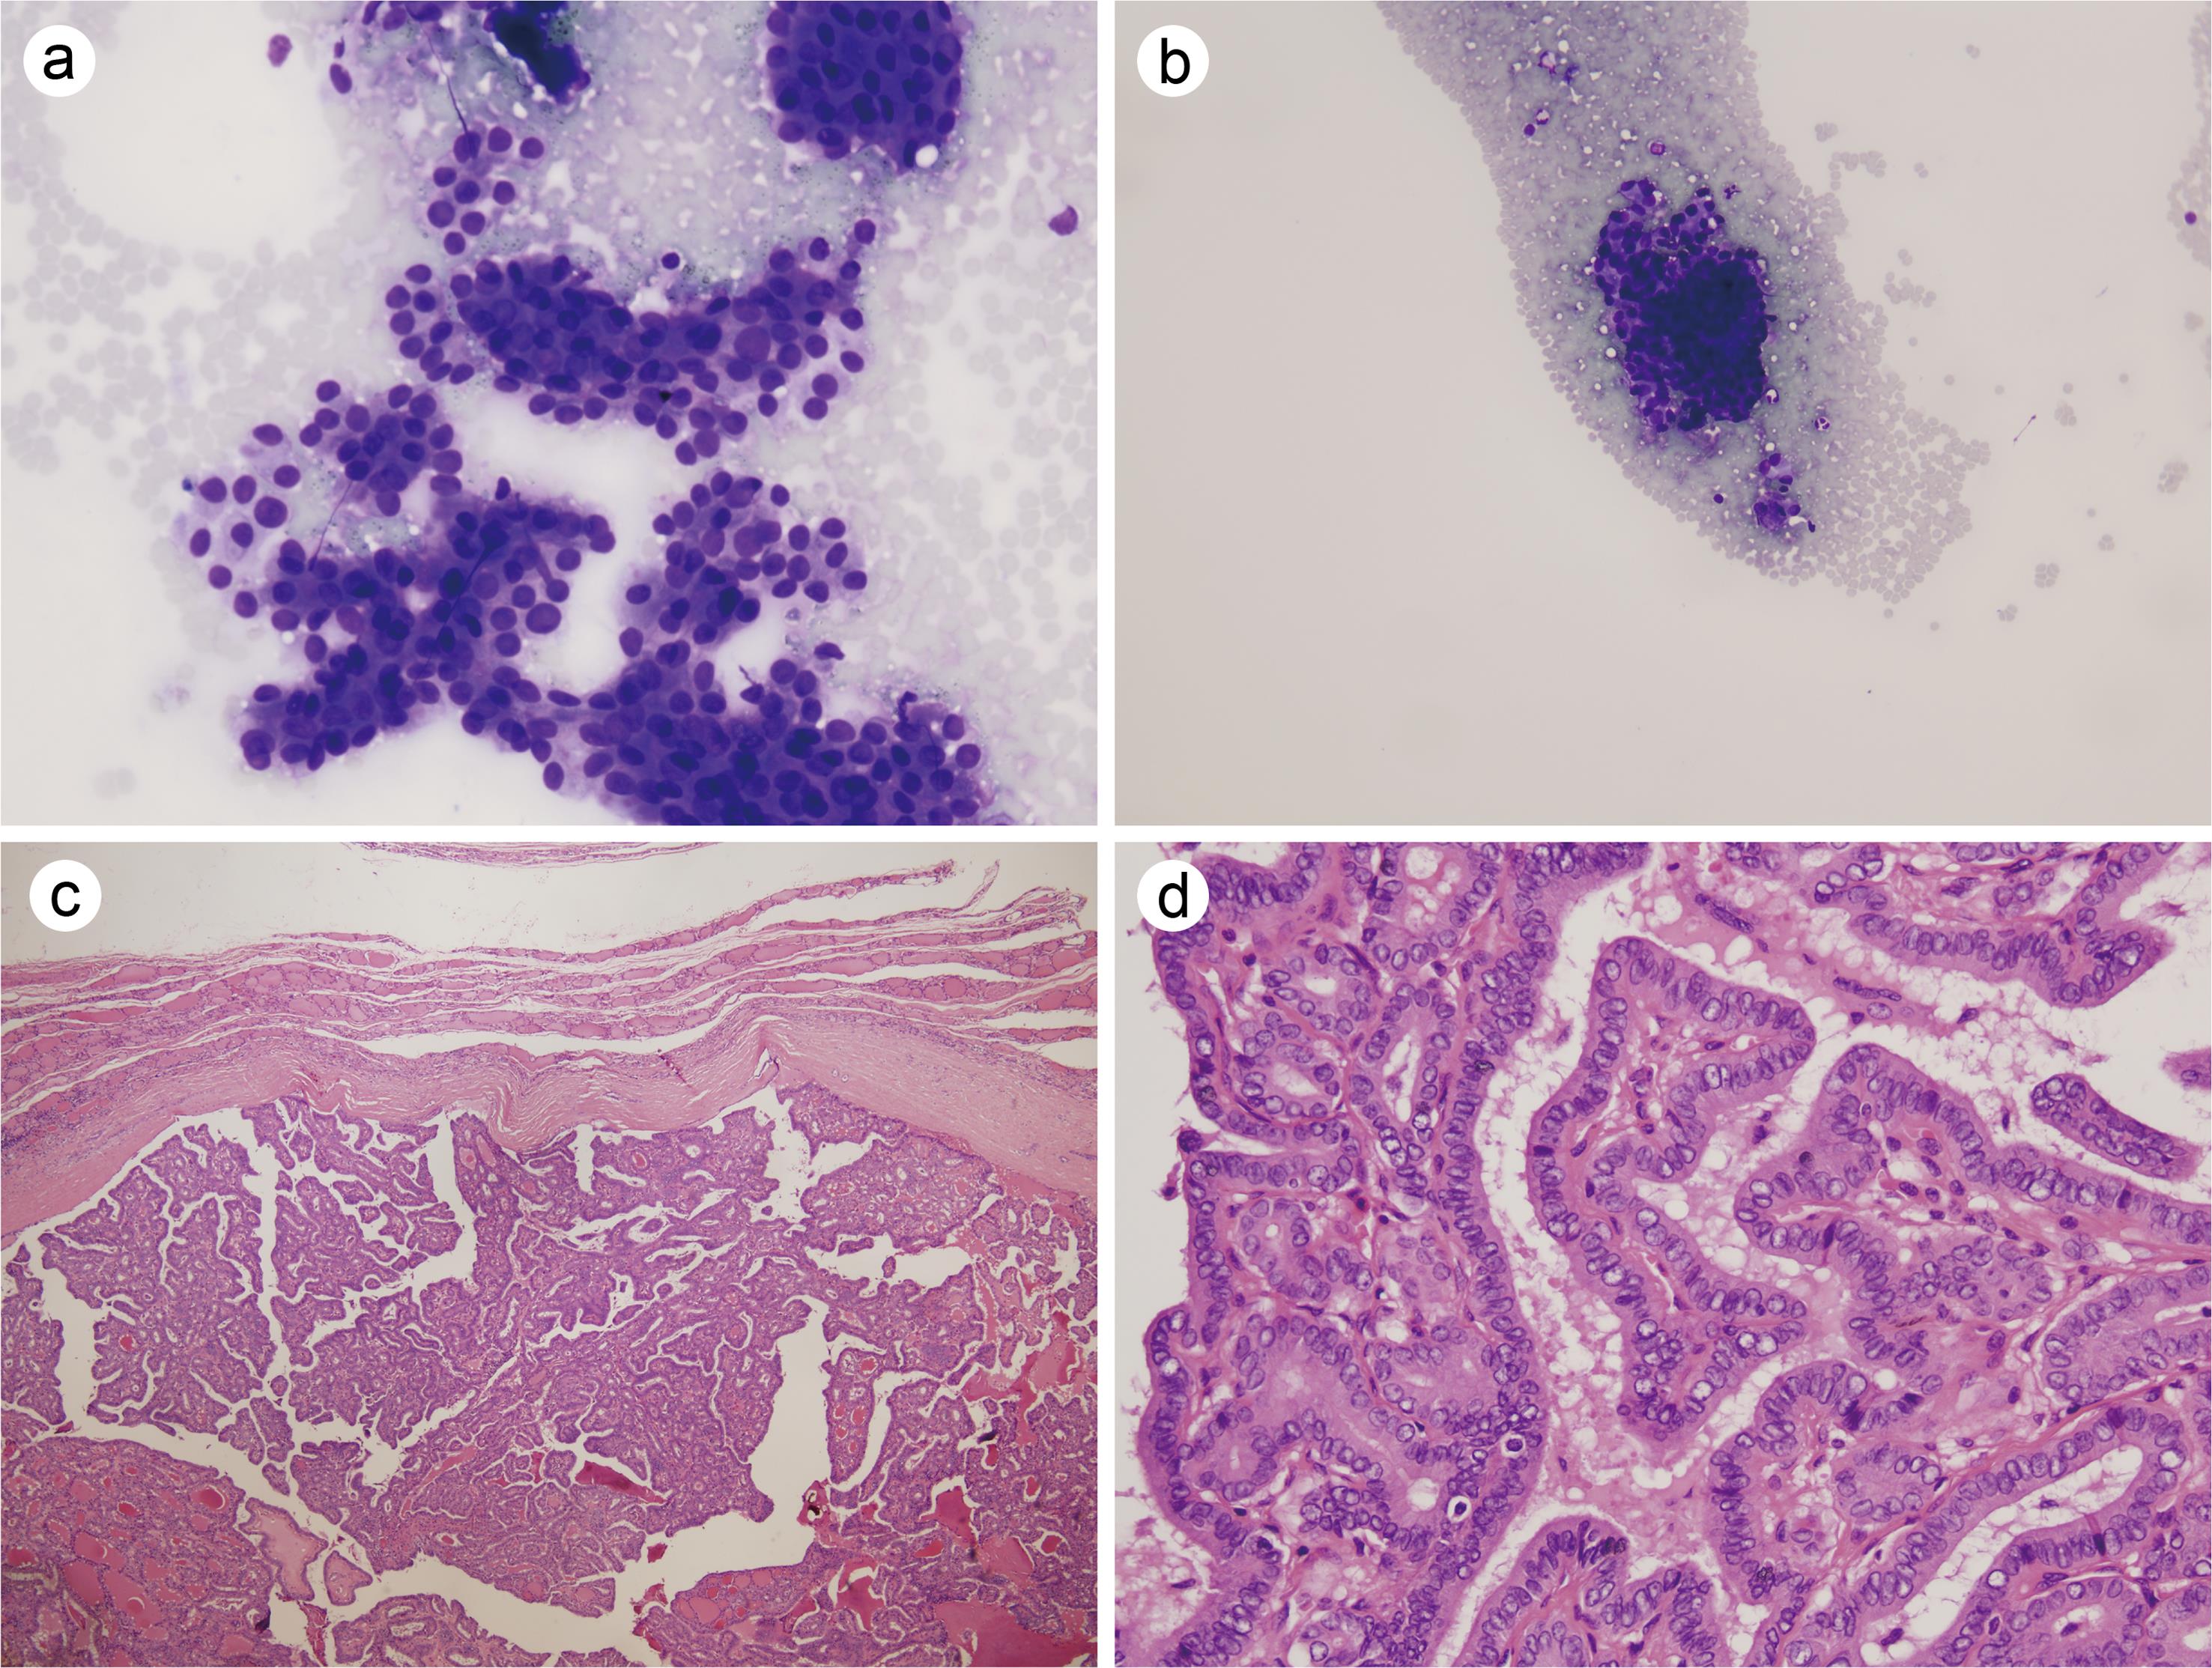 FNAC of a patient who was diagnosed with a suspicious malignancy via repeat cytology, underwent surgery, and was diagnosed with papillary thyroid carcinoma.